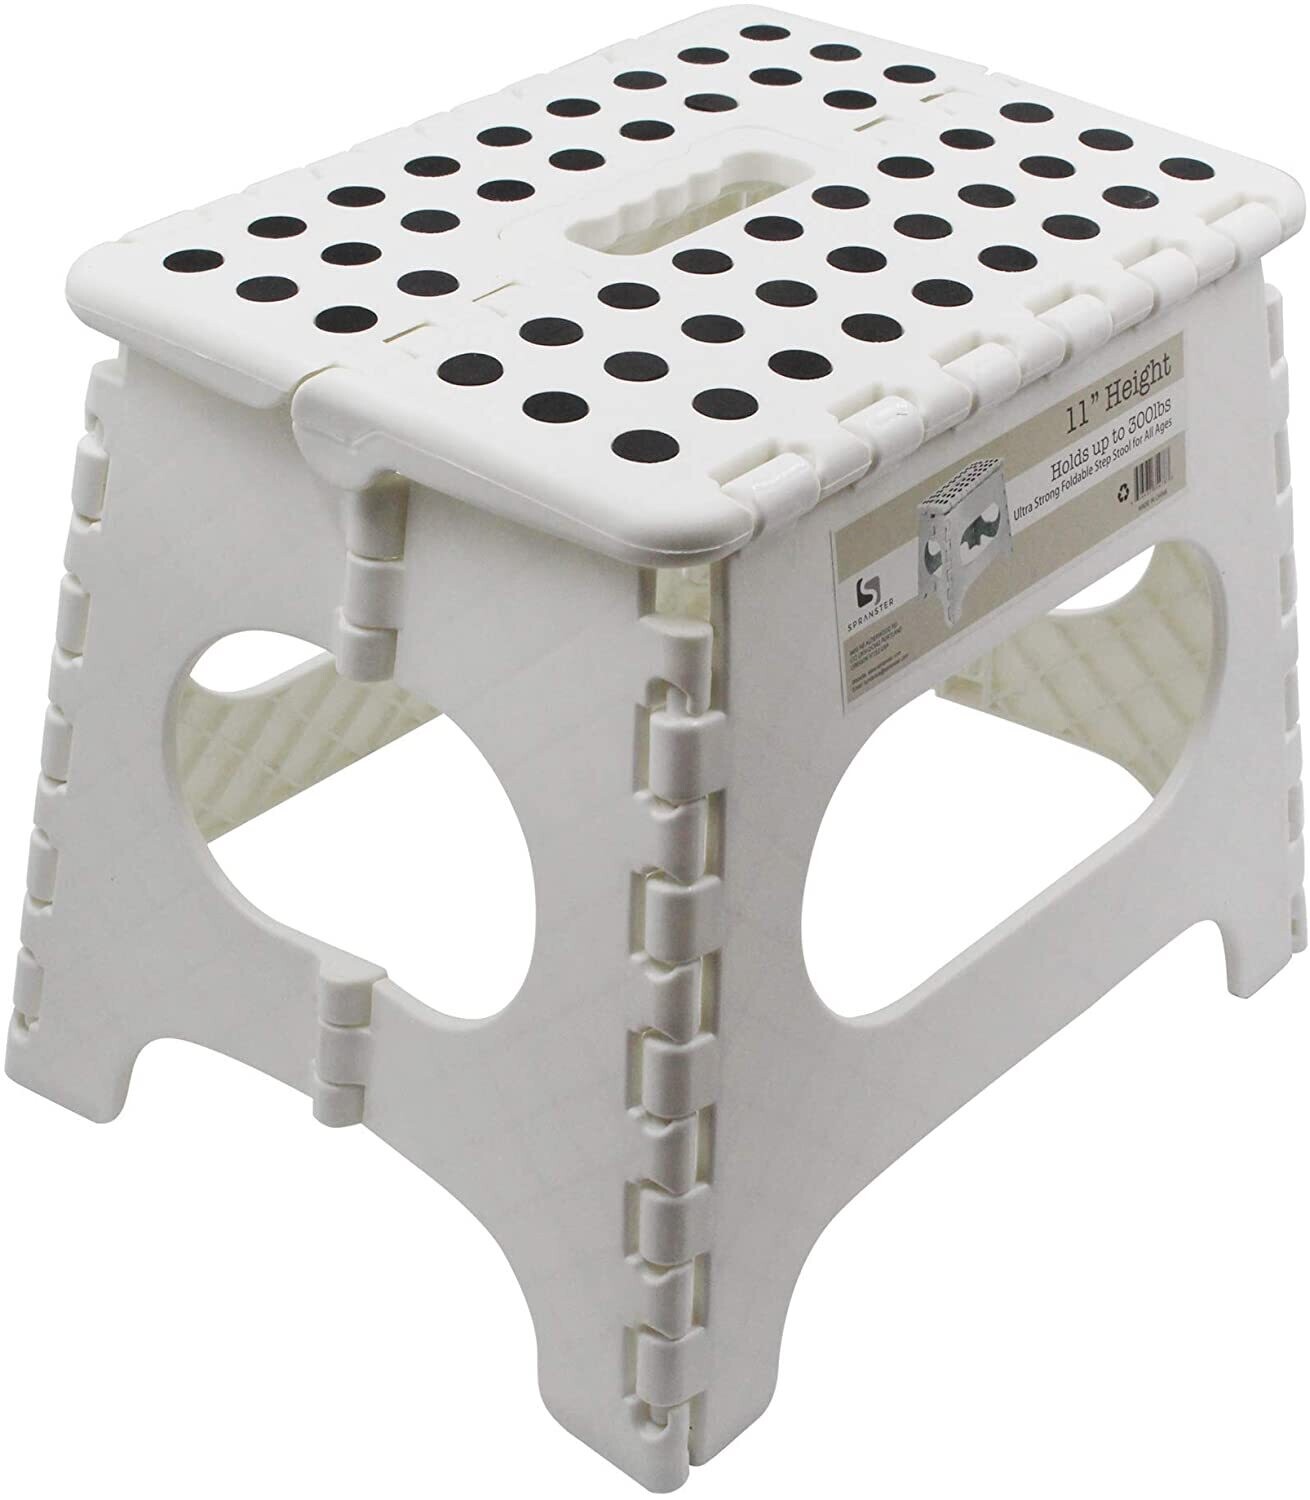 Super Strong Folding Step Stool - 11" Height - Holds